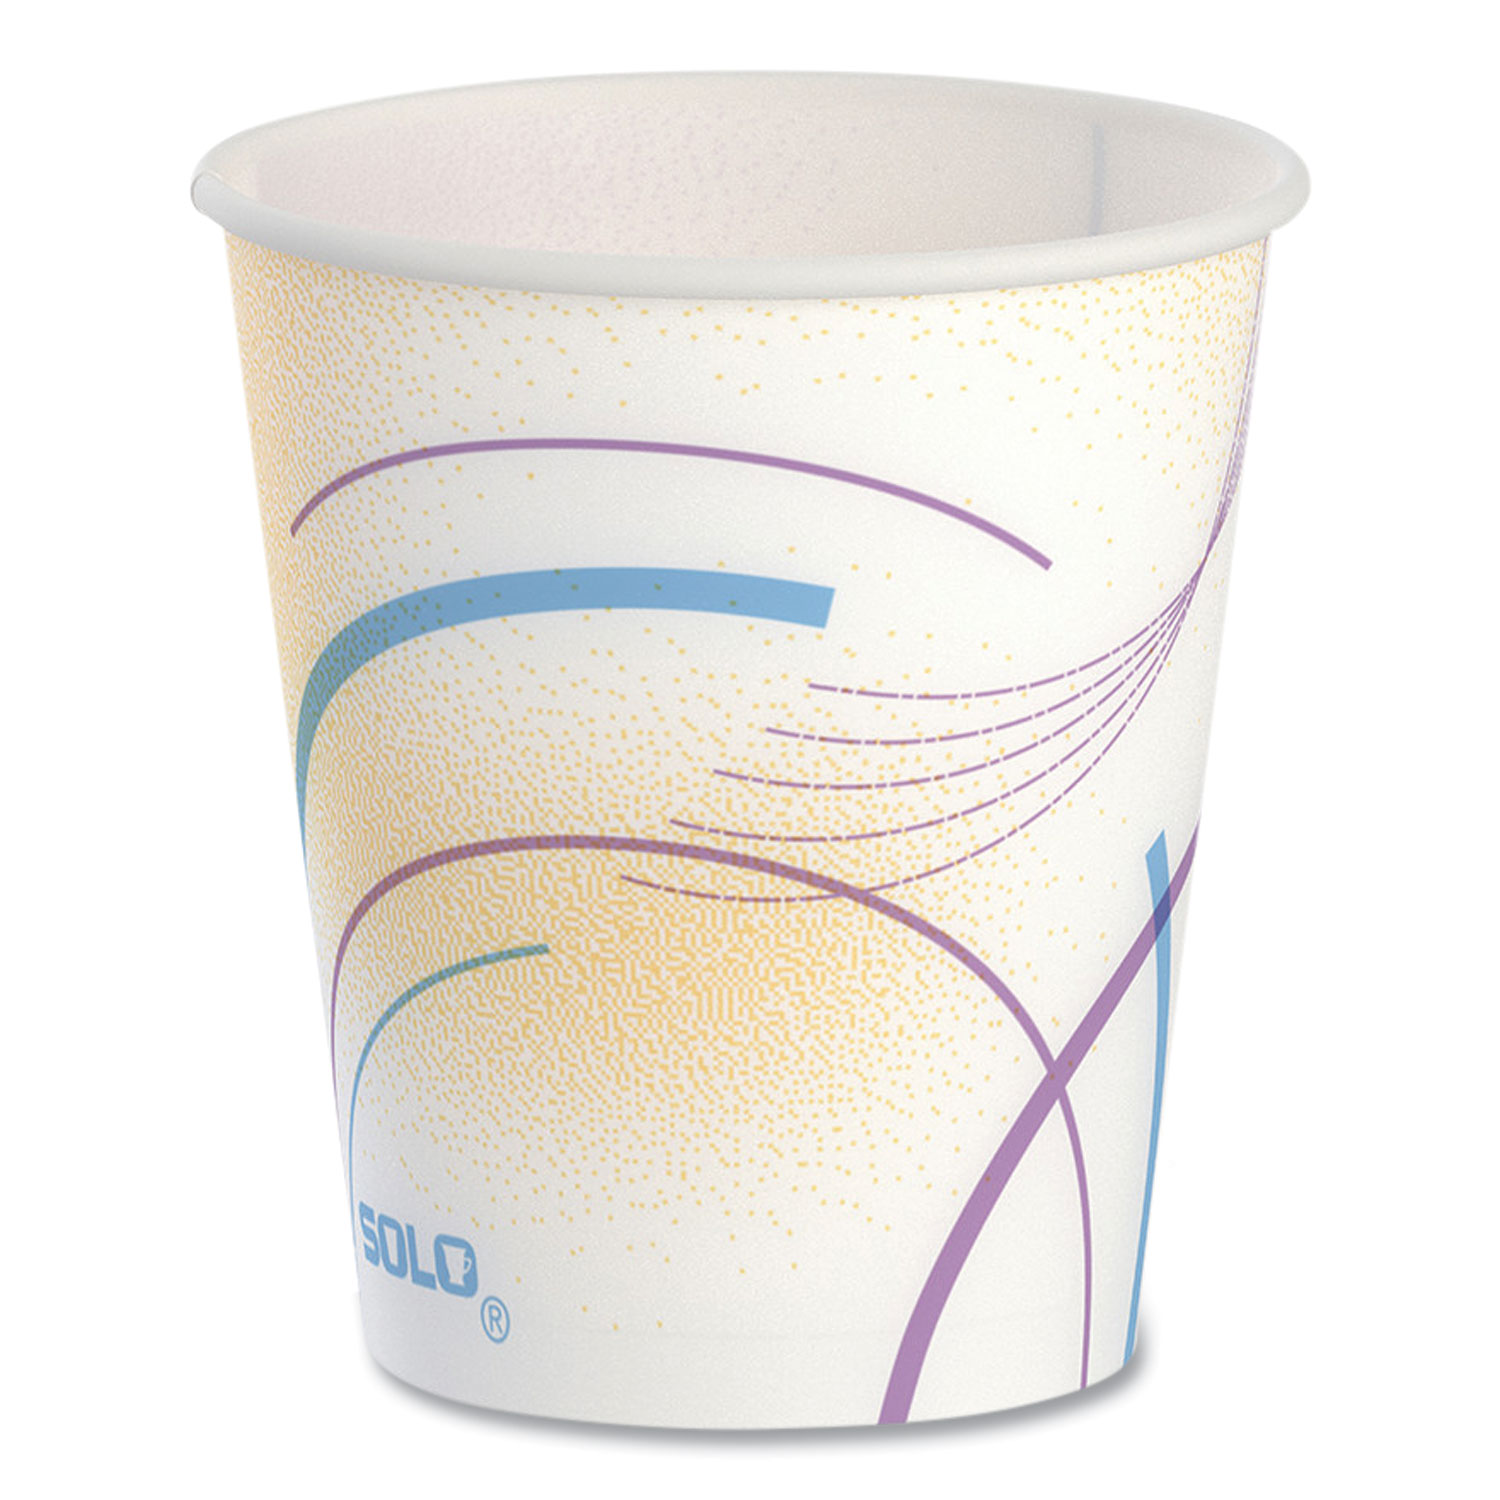 Solo Paper Water Cups, Cold, 5 oz, Meridian Design, Multicolored, 100/Sleeve, 25 Sleeves/Carton